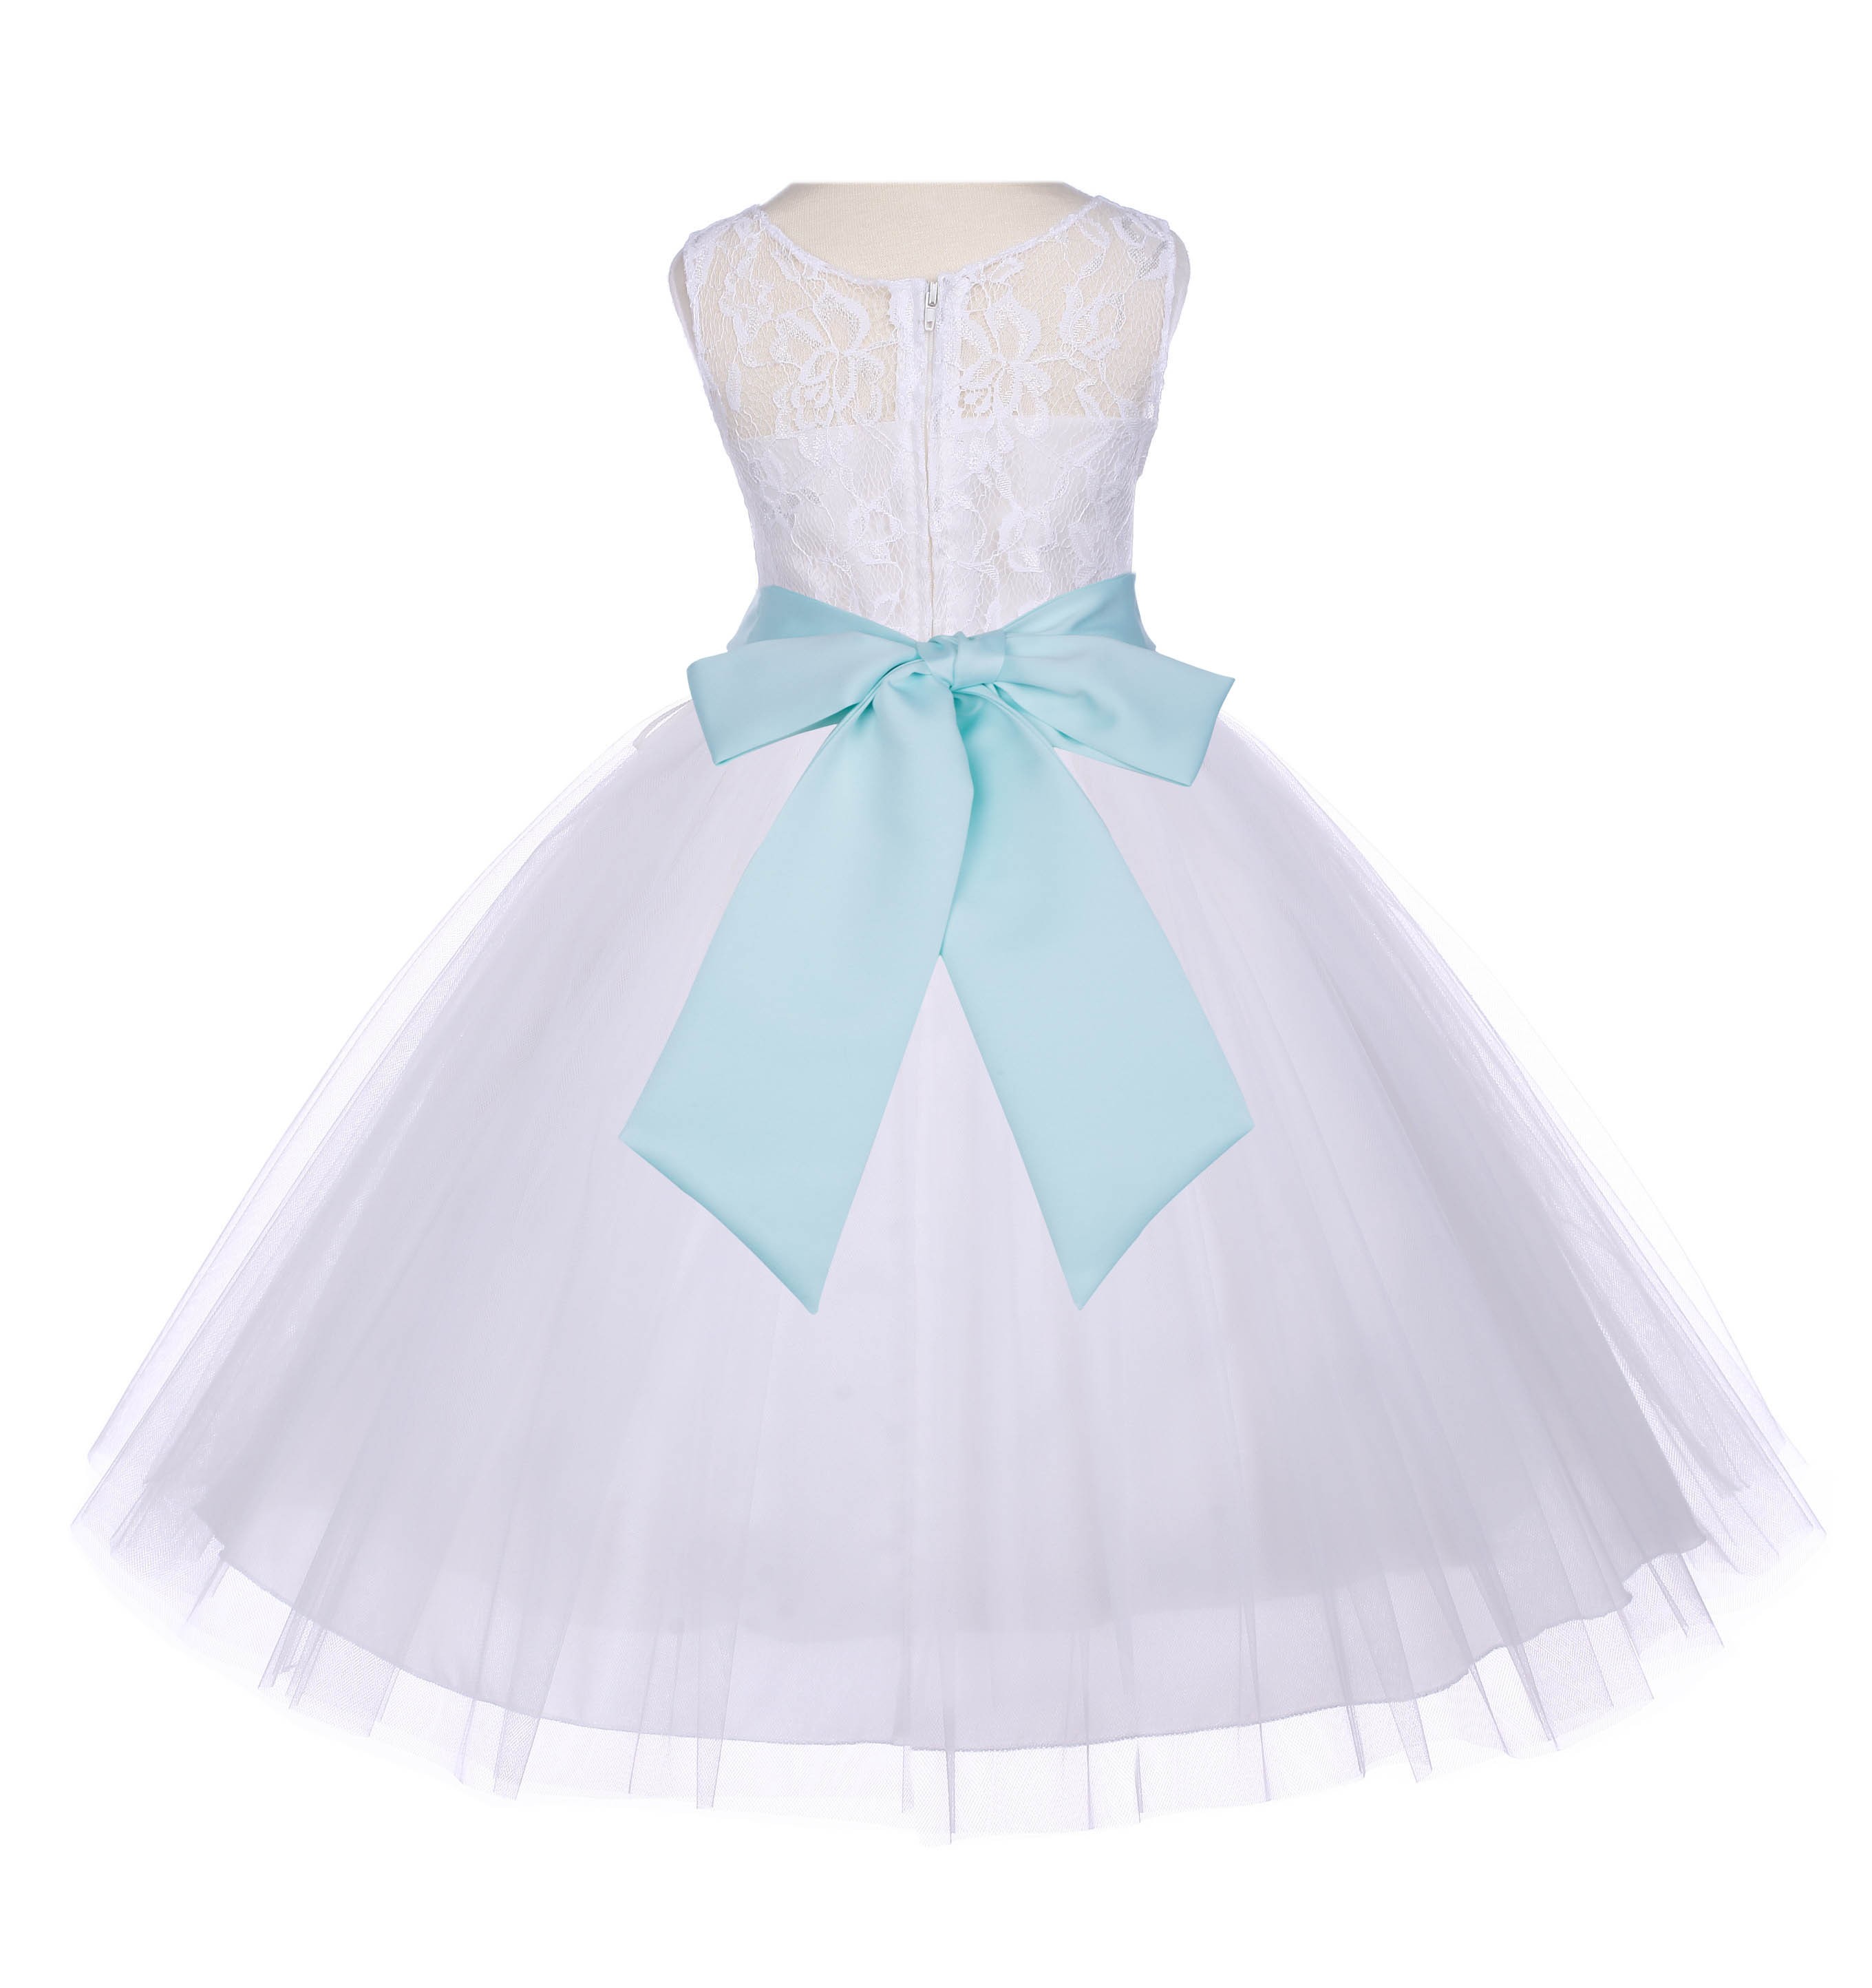 Ivory/Mint Floral Lace Bodice Tulle Flower Girl Dress Bridesmaid 153S